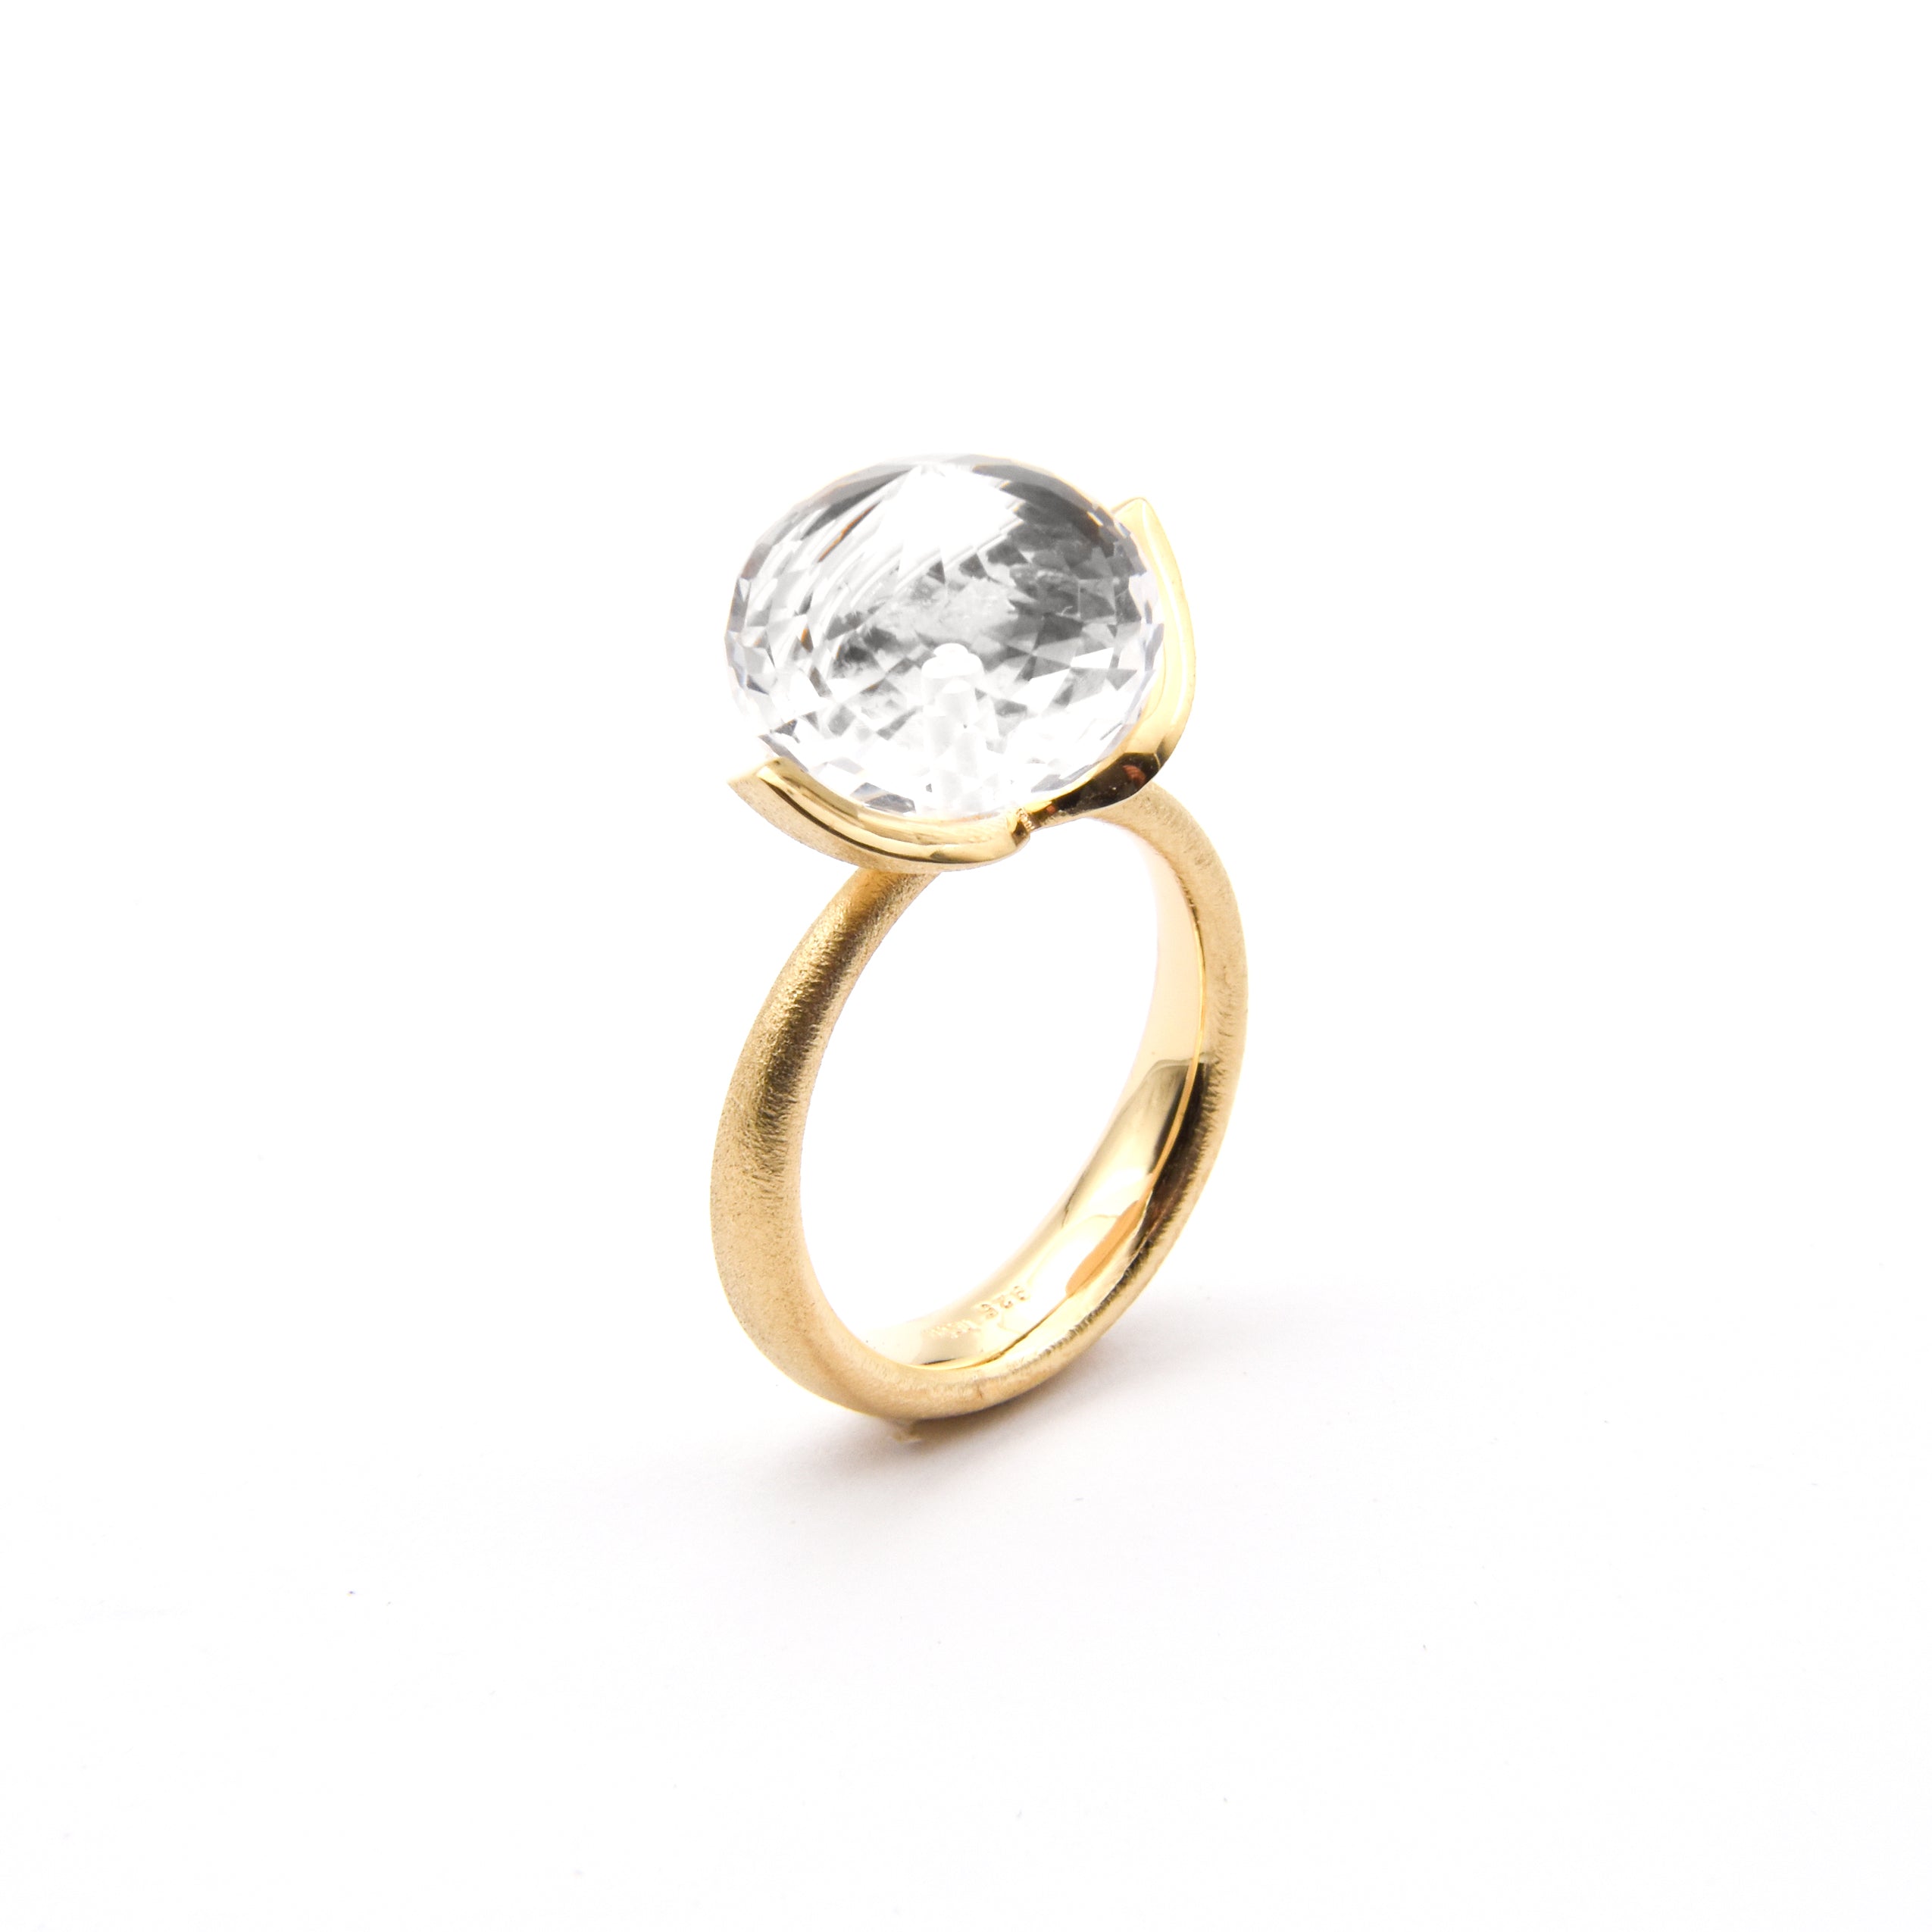 Dolce ring "big" with rock crystal 925/-